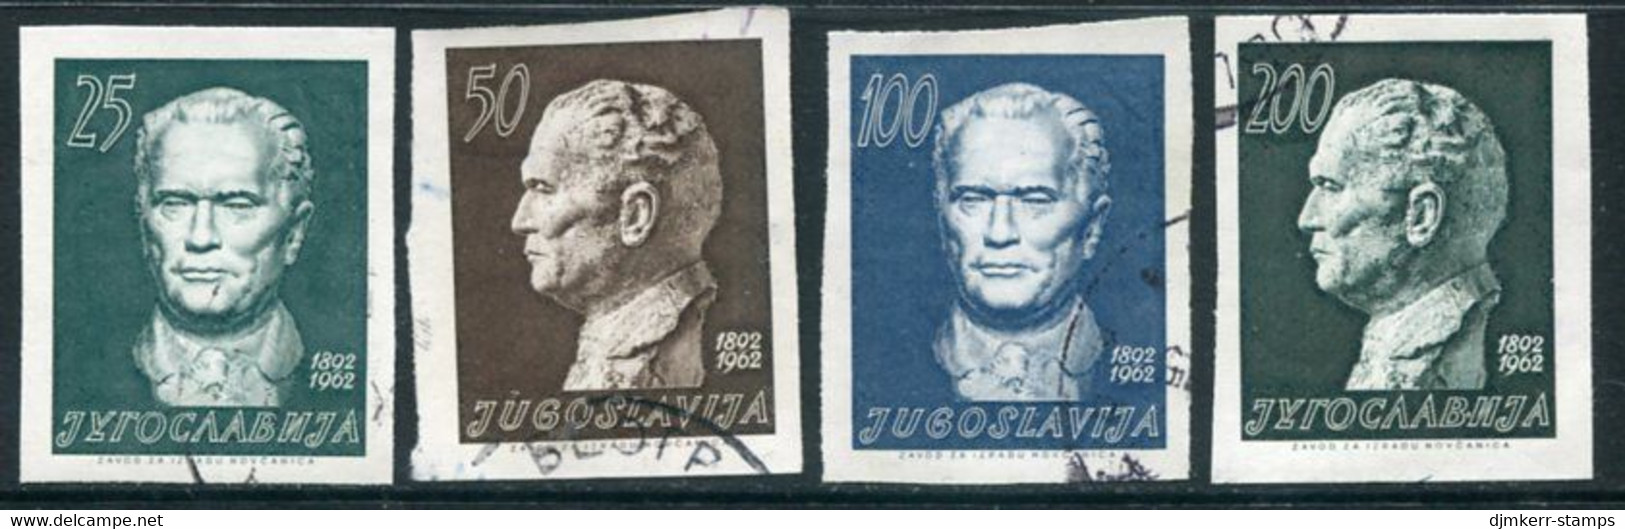 YUGOSLAVIA 1962 Tito 70th Birthday Imperforate Ex Block  Used.  Michel 1003-06B - Used Stamps